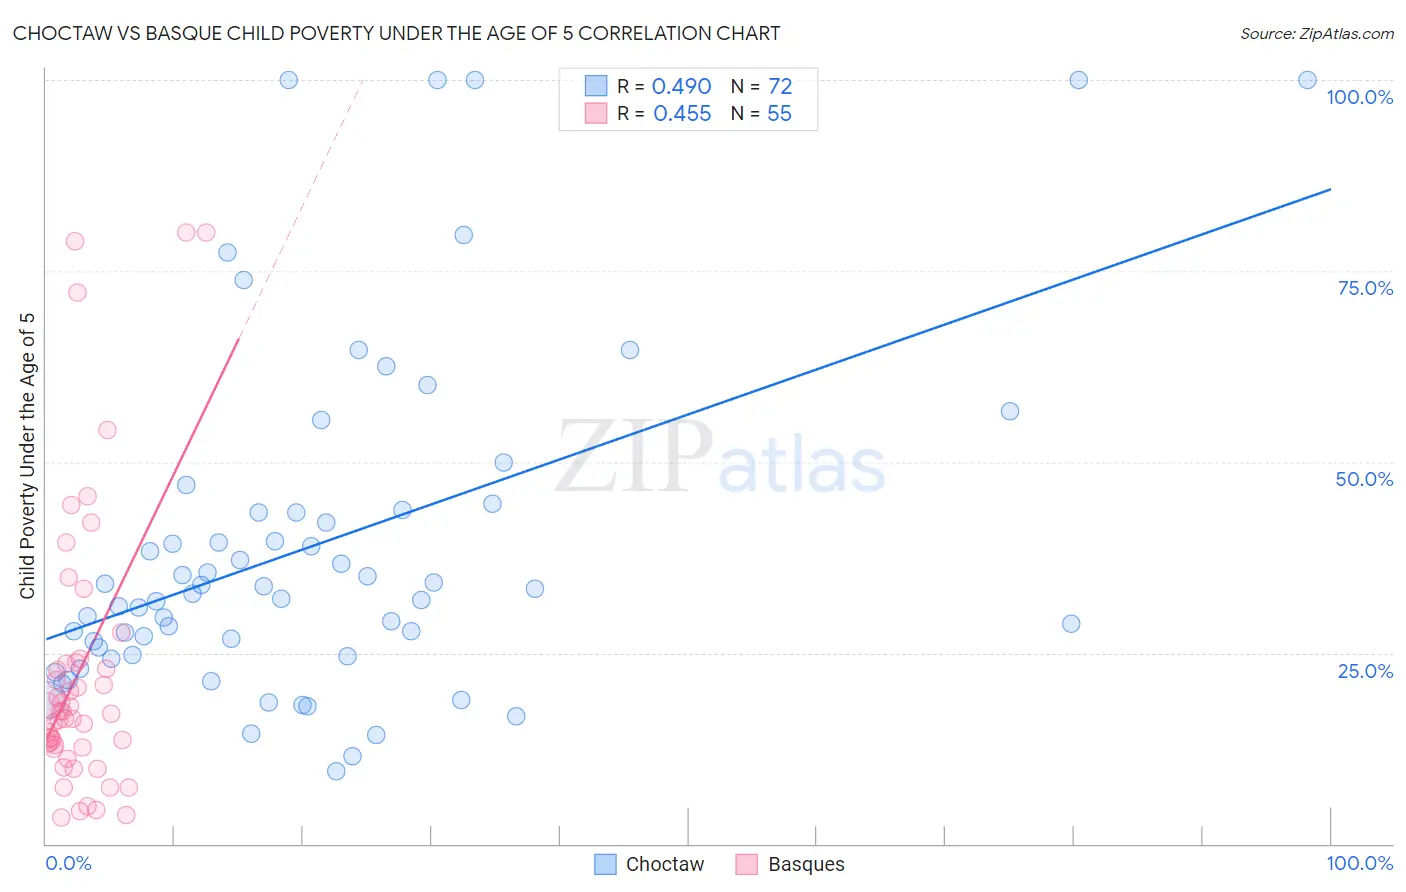 Choctaw vs Basque Child Poverty Under the Age of 5